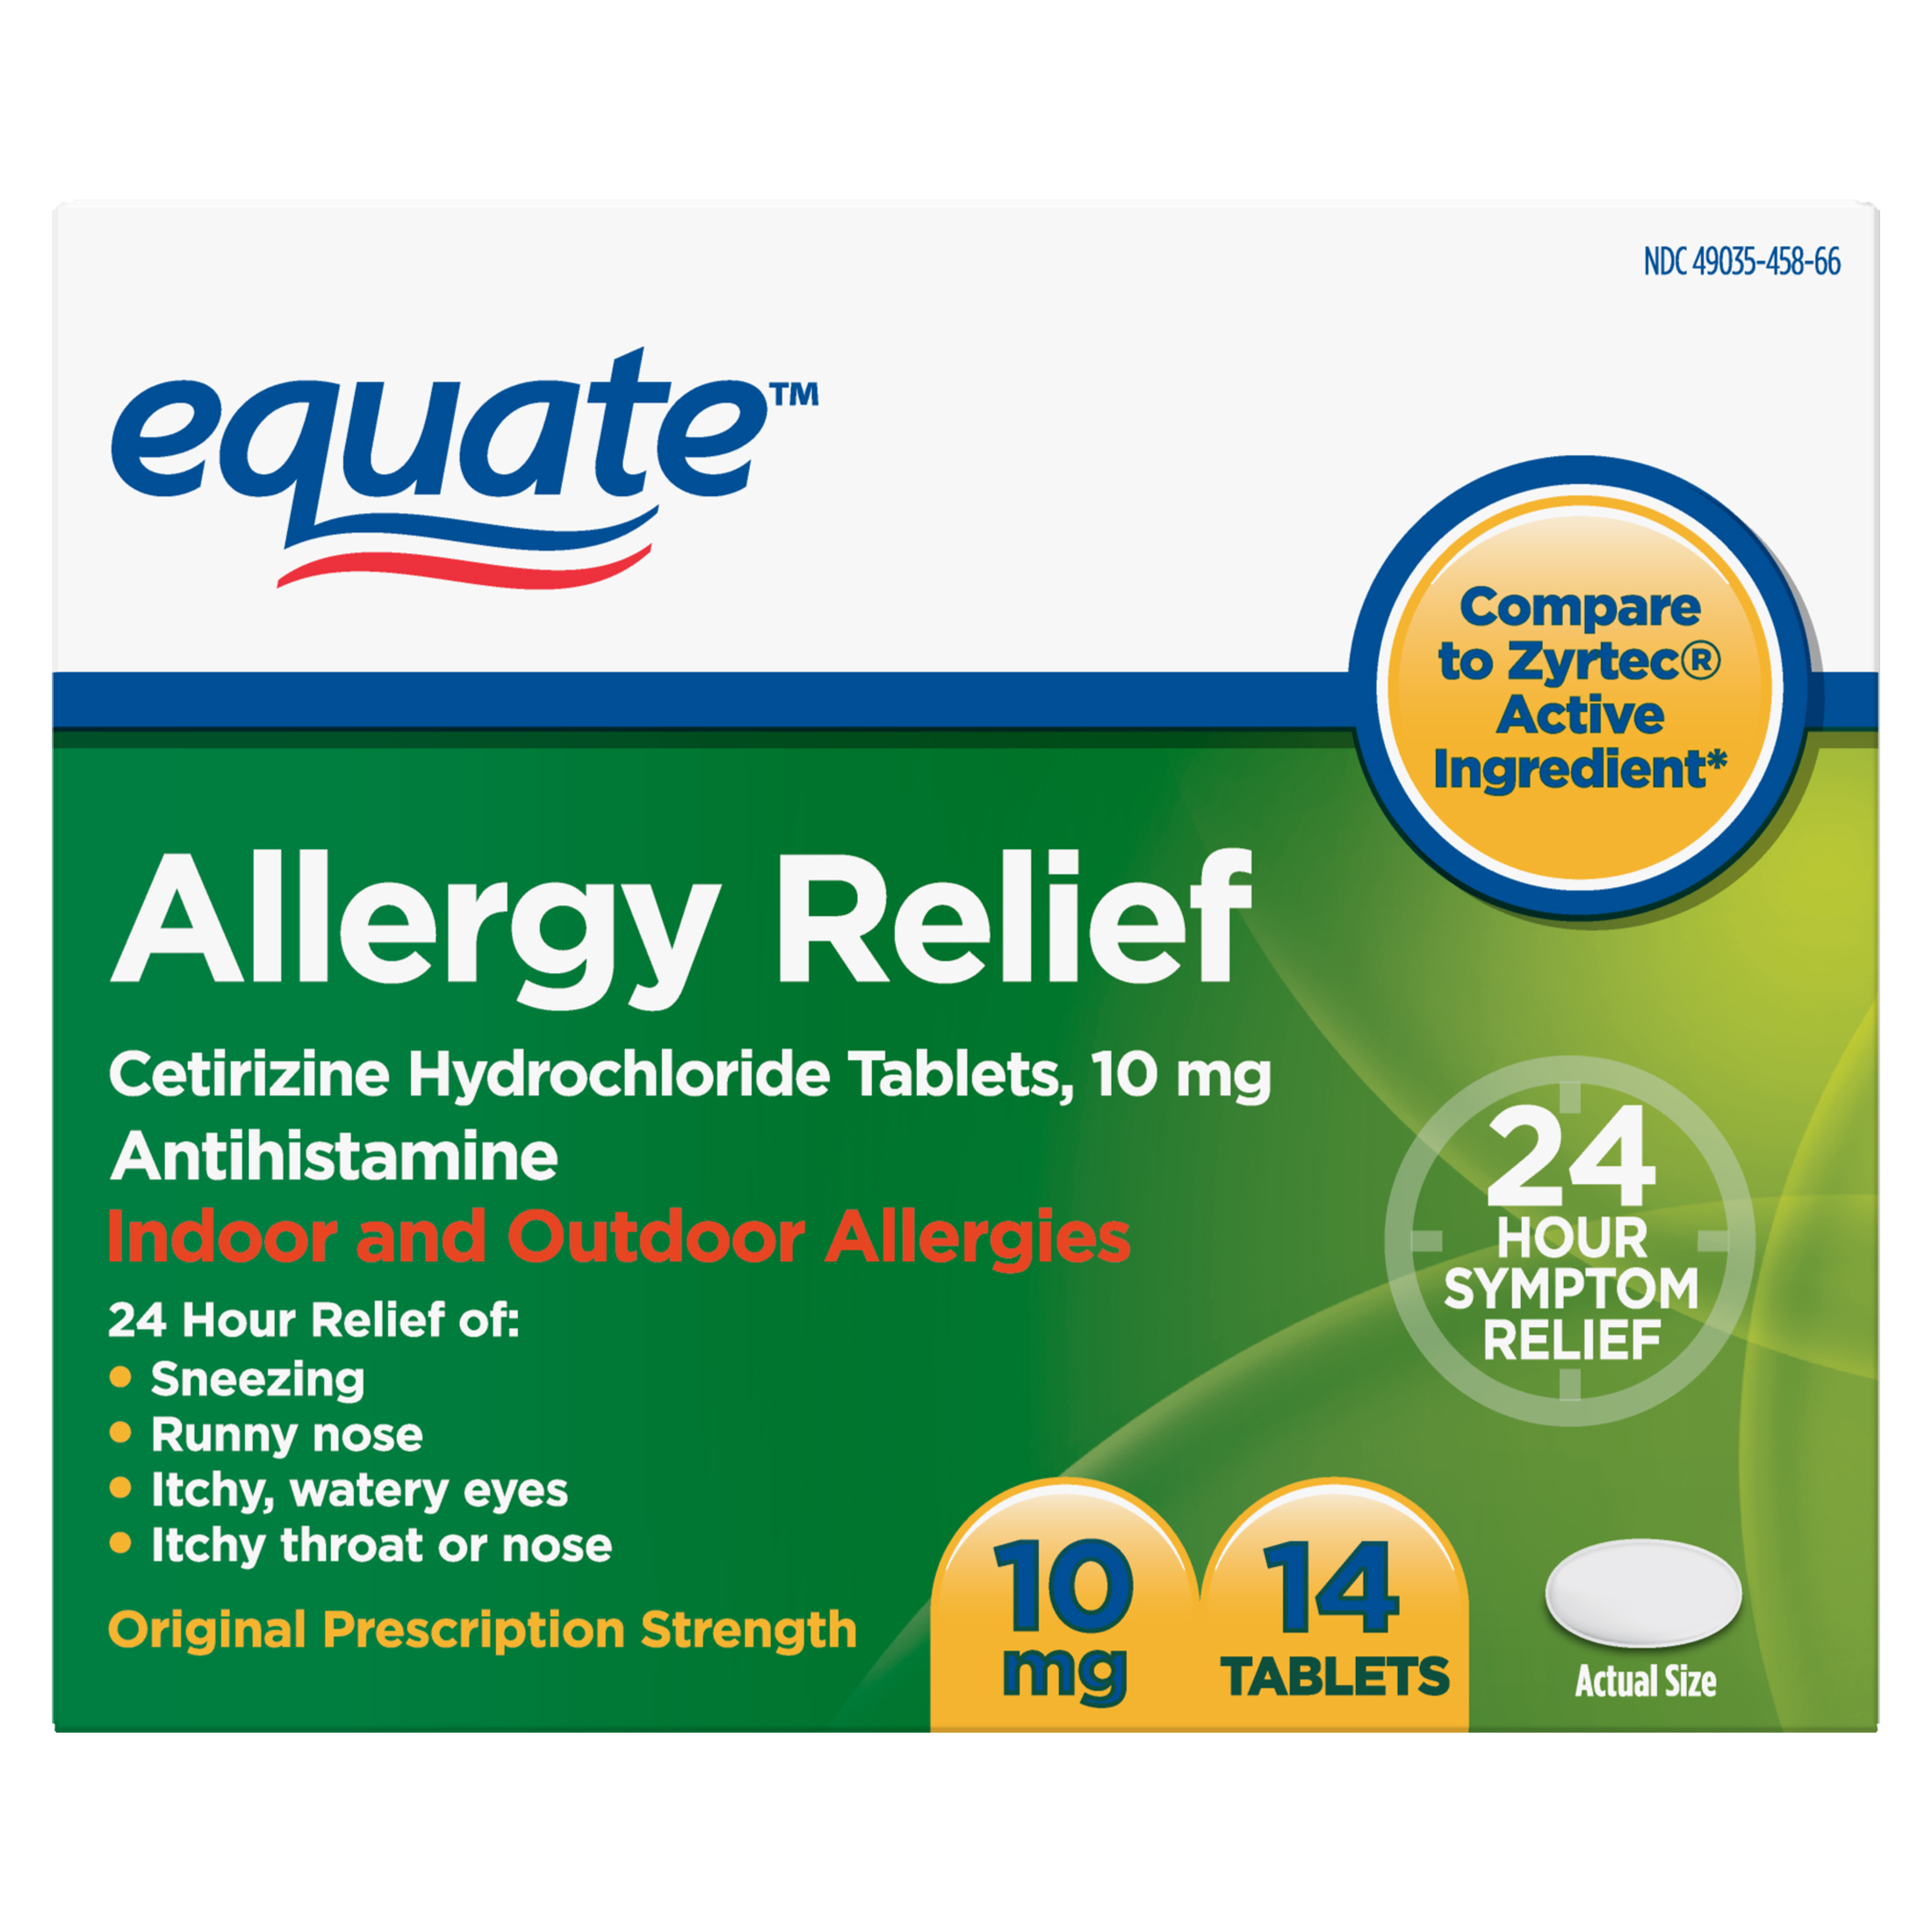 Equate Allergy Relief, Cetirizine Hydrochloride Tablets, 10 mg, 14 Count - image 1 of 10